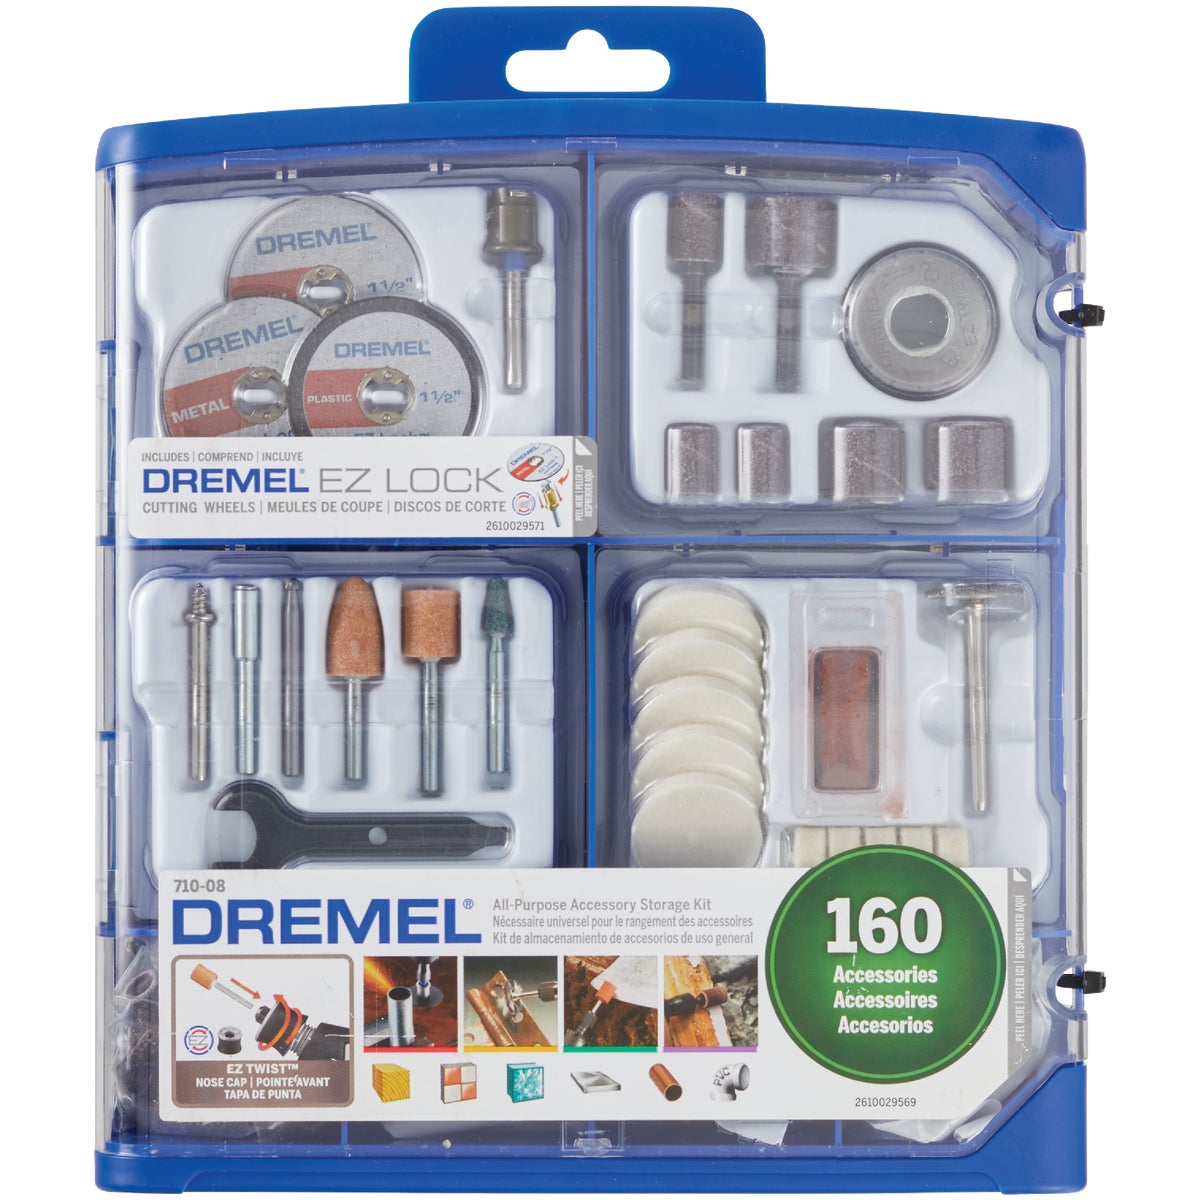 Item 319701, Complete start-up kit offering the breadth of accessories helpful for a 